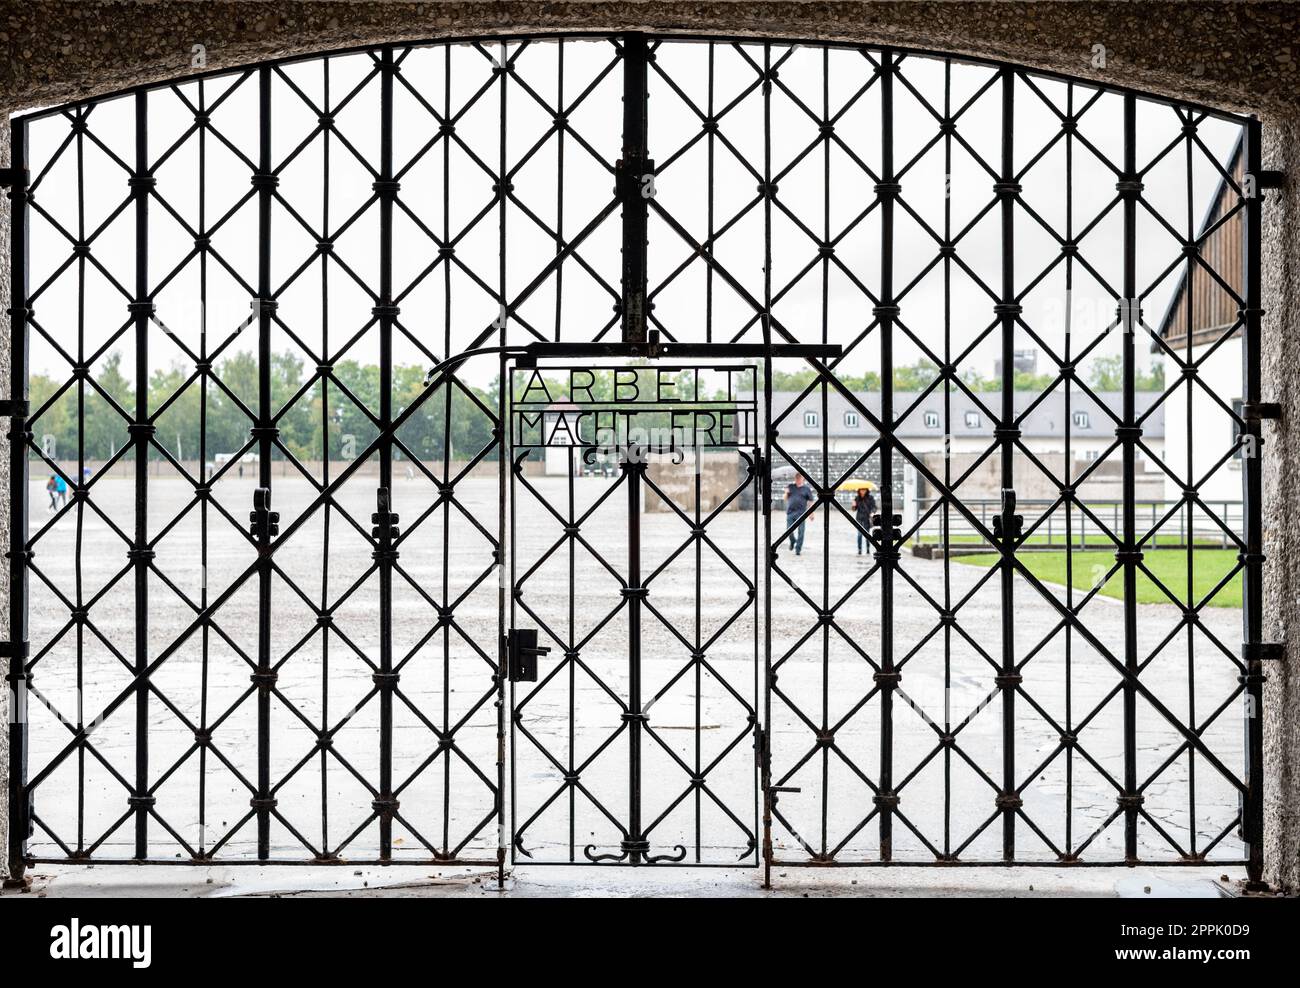 Iconic gate at the entrance to concentration camp Dachau, Germany Stock Photo